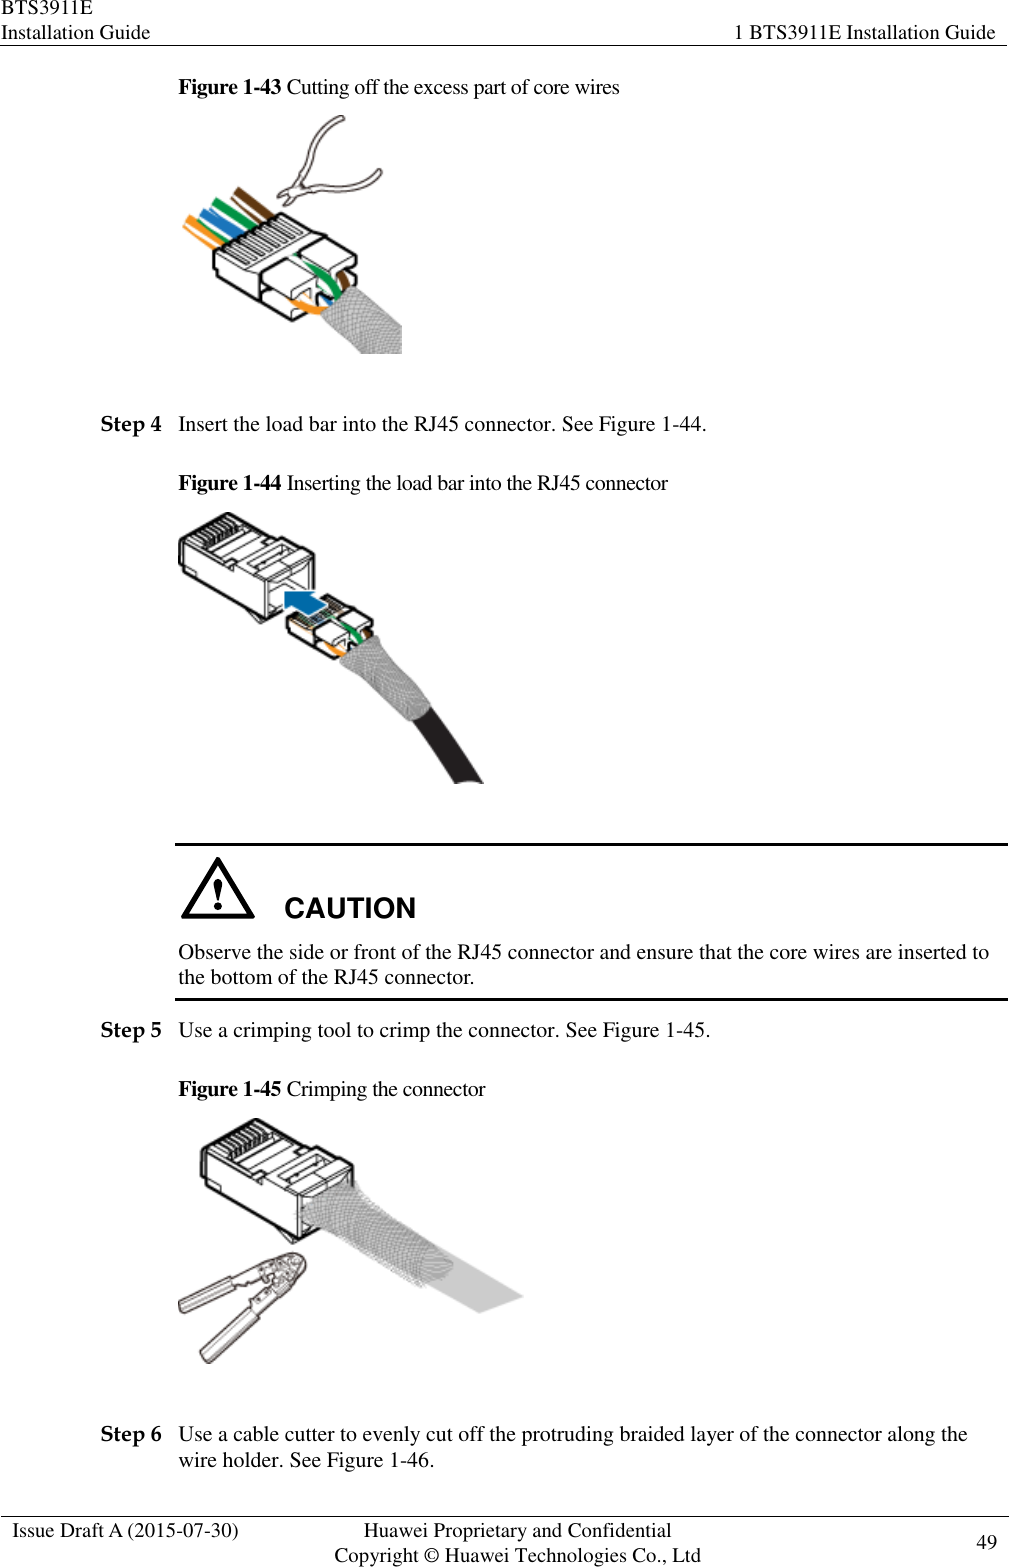 BTS3911E Installation Guide 1 BTS3911E Installation Guide  Issue Draft A (2015-07-30) Huawei Proprietary and Confidential           Copyright © Huawei Technologies Co., Ltd 49    Figure 1-43 Cutting off the excess part of core wires   Step 4 Insert the load bar into the RJ45 connector. See Figure 1-44. Figure 1-44 Inserting the load bar into the RJ45 connector     CAUTION Observe the side or front of the RJ45 connector and ensure that the core wires are inserted to the bottom of the RJ45 connector. Step 5 Use a crimping tool to crimp the connector. See Figure 1-45. Figure 1-45 Crimping the connector     Step 6 Use a cable cutter to evenly cut off the protruding braided layer of the connector along the wire holder. See Figure 1-46. 